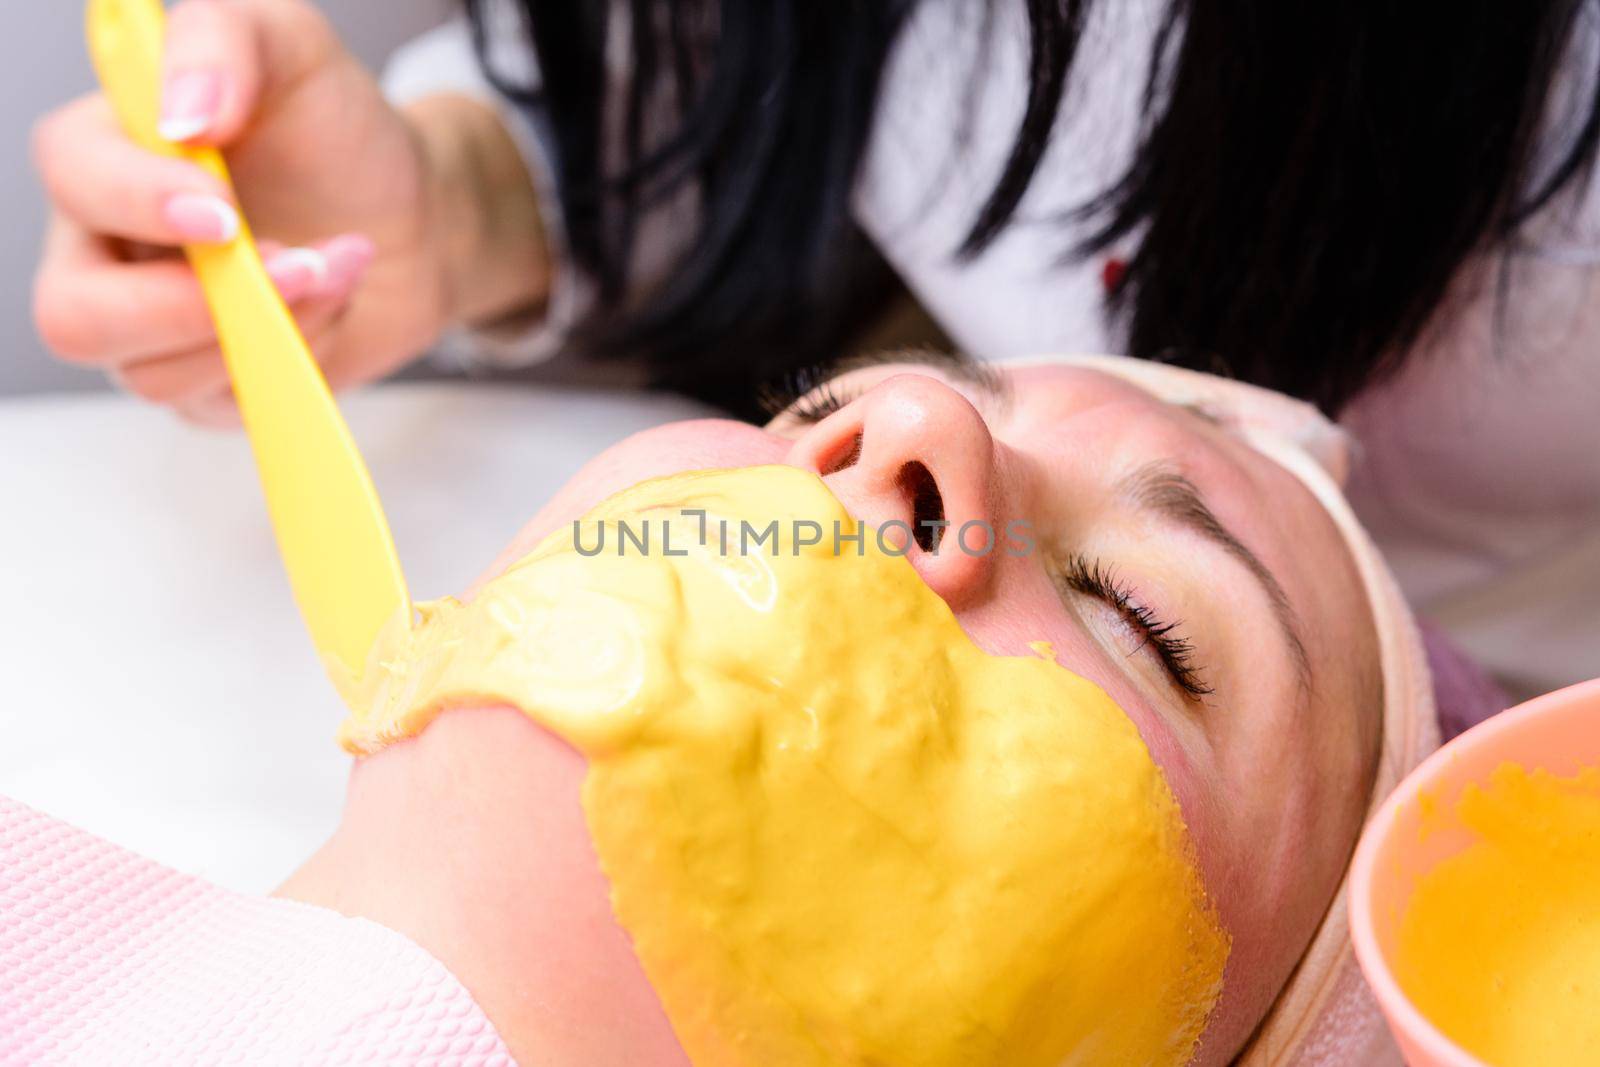 Applying a golden mask on the face after the cleansing procedure, an aromatic mask to moisturize, rejuvenate and lighten the skin. new